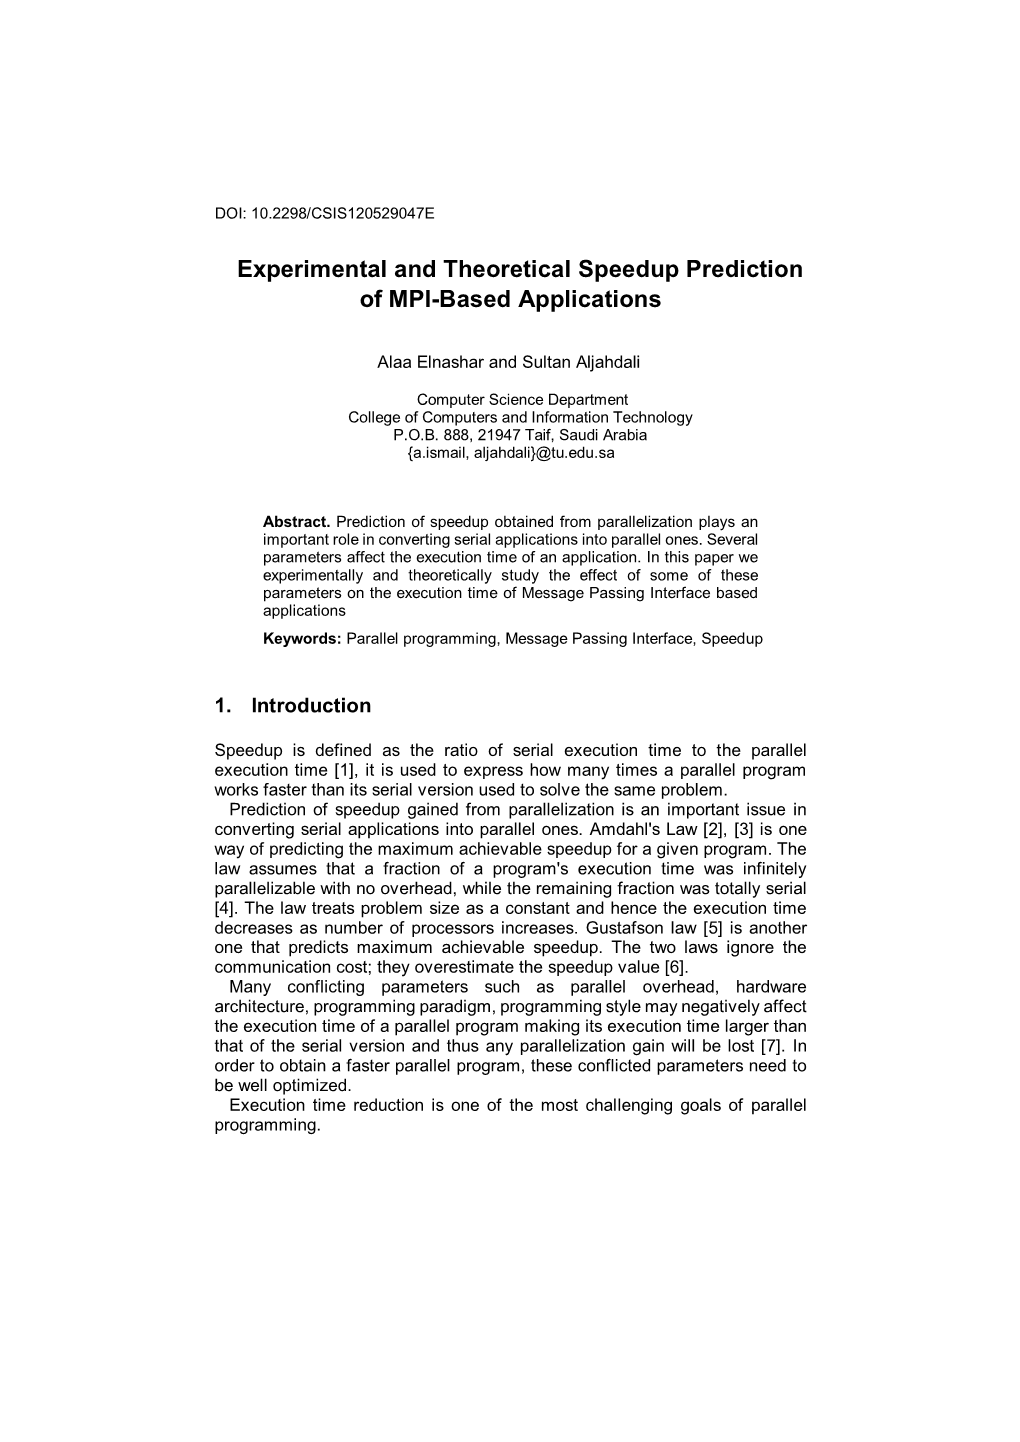 Experimental and Theoretical Speedup Prediction of MPI-Based Applications